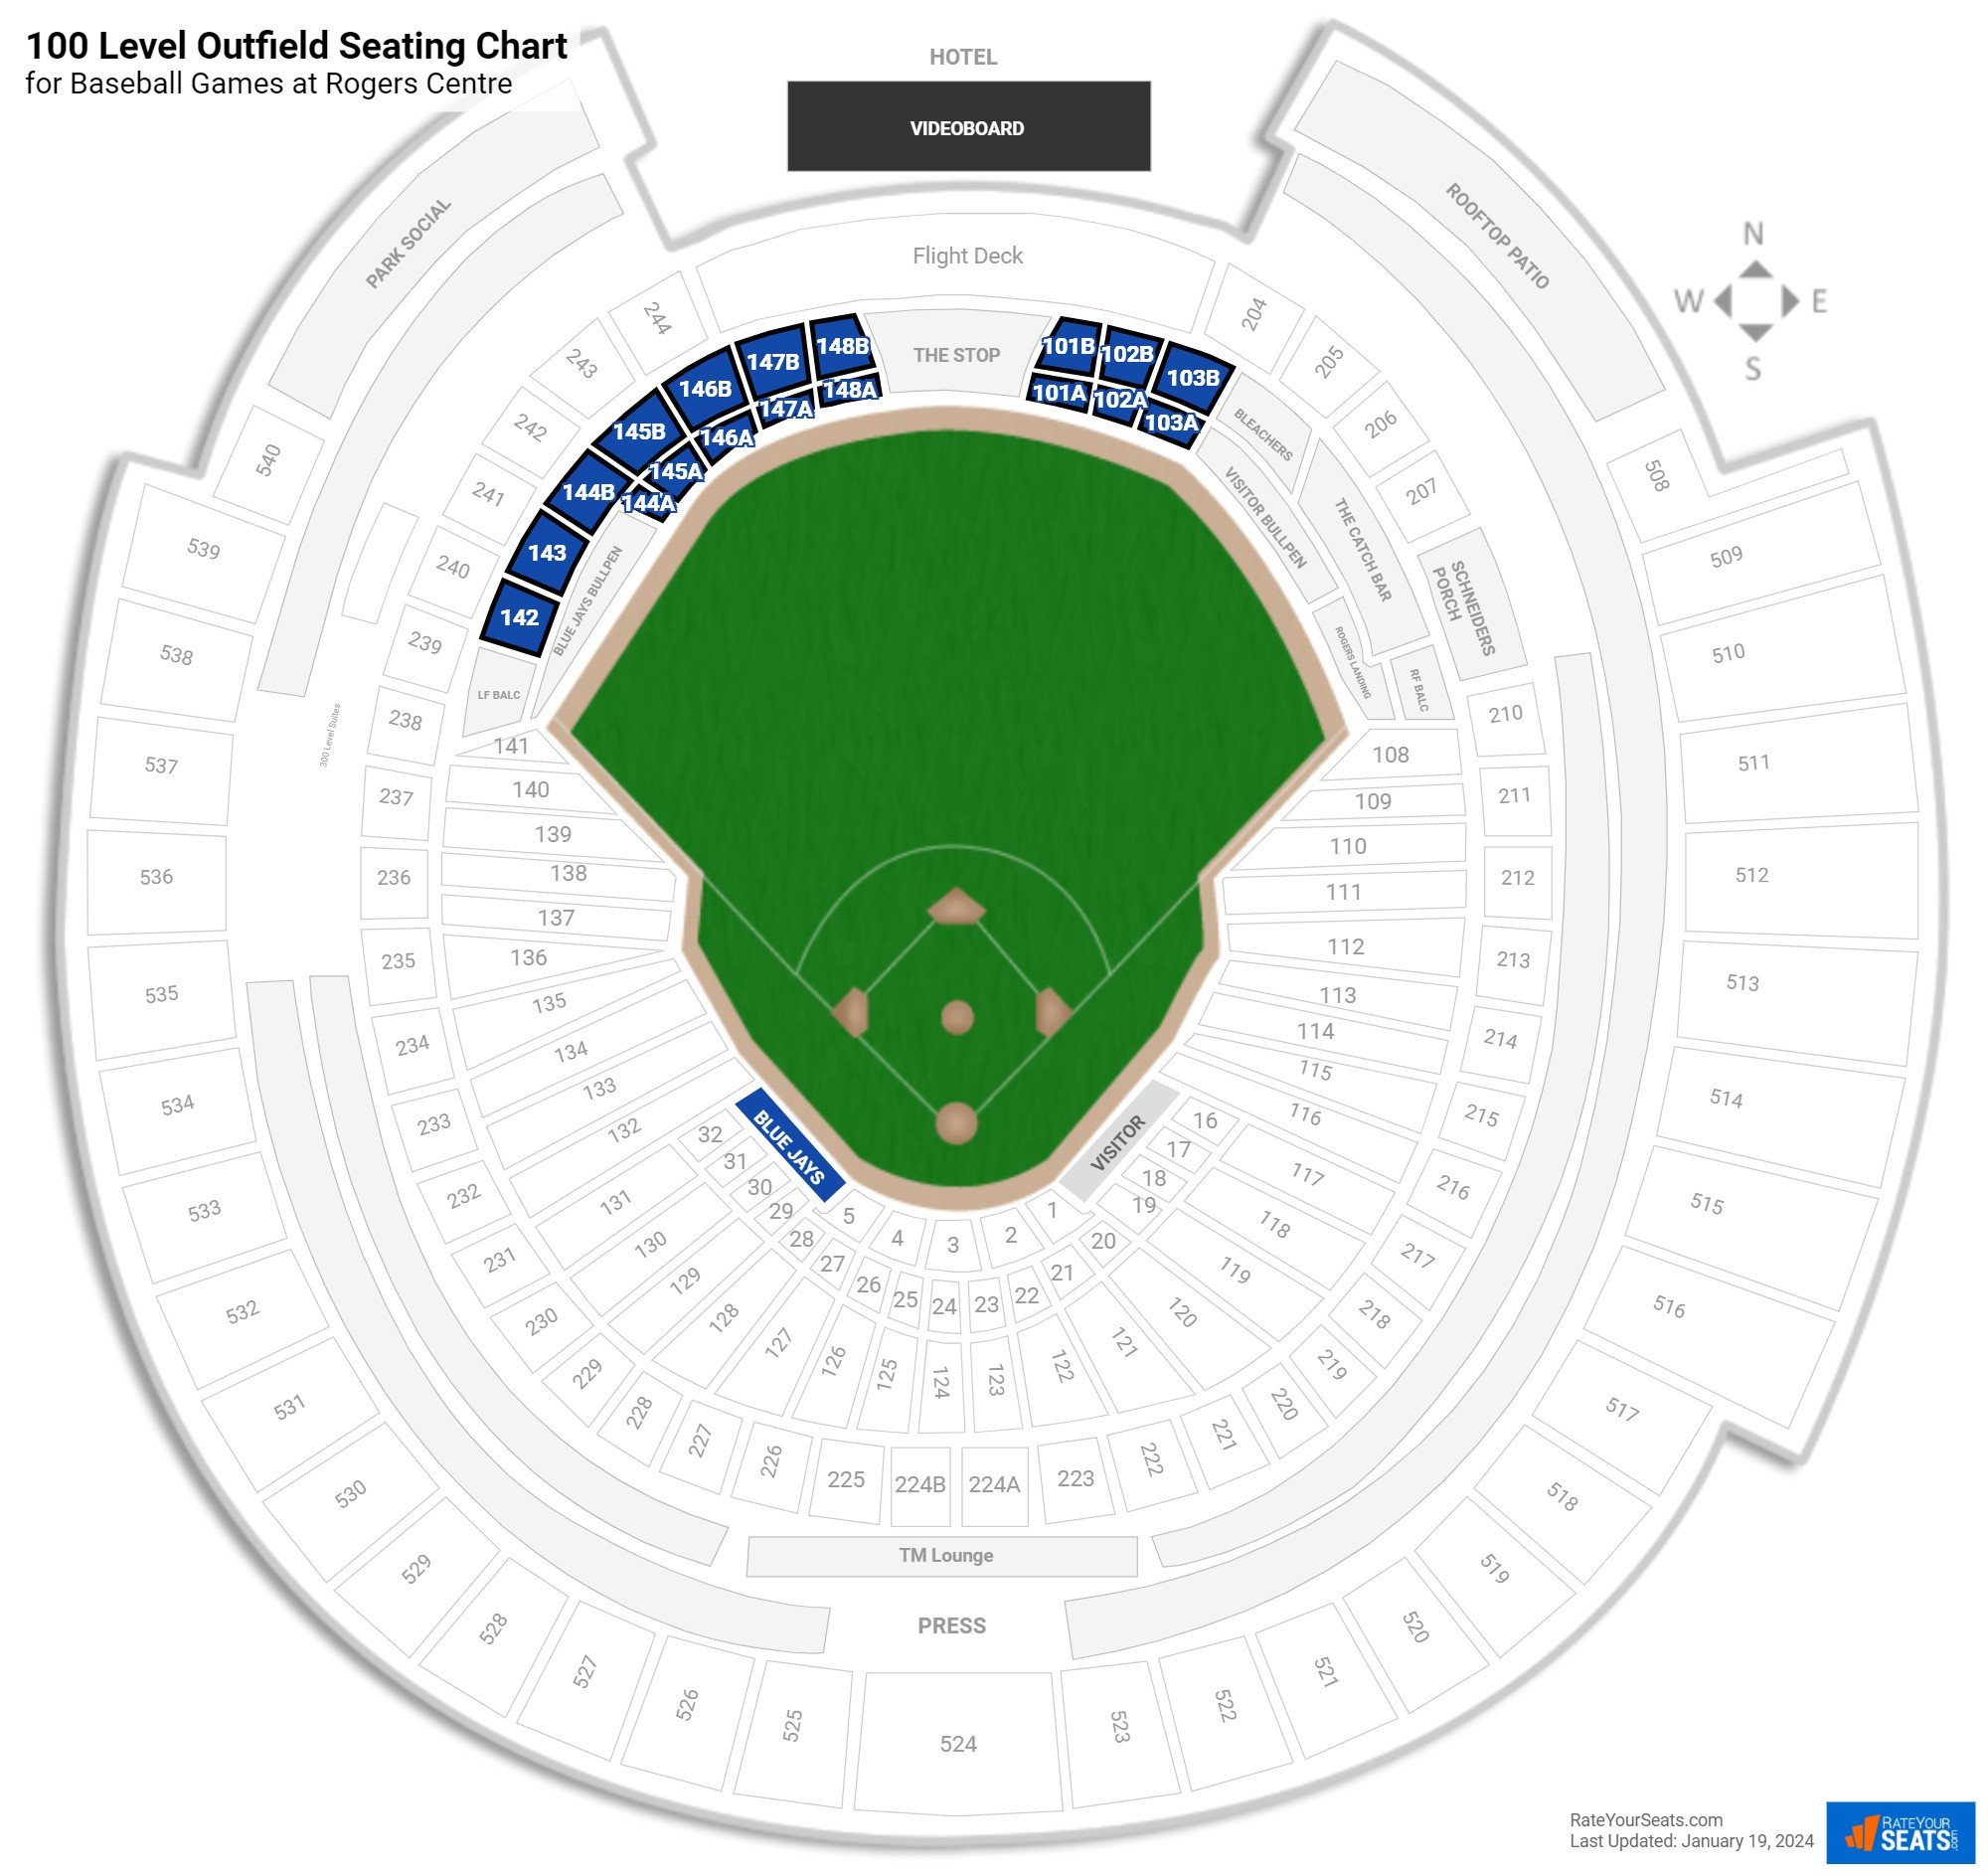 Baseball 100 Level Outfield Seating Chart at Rogers Centre